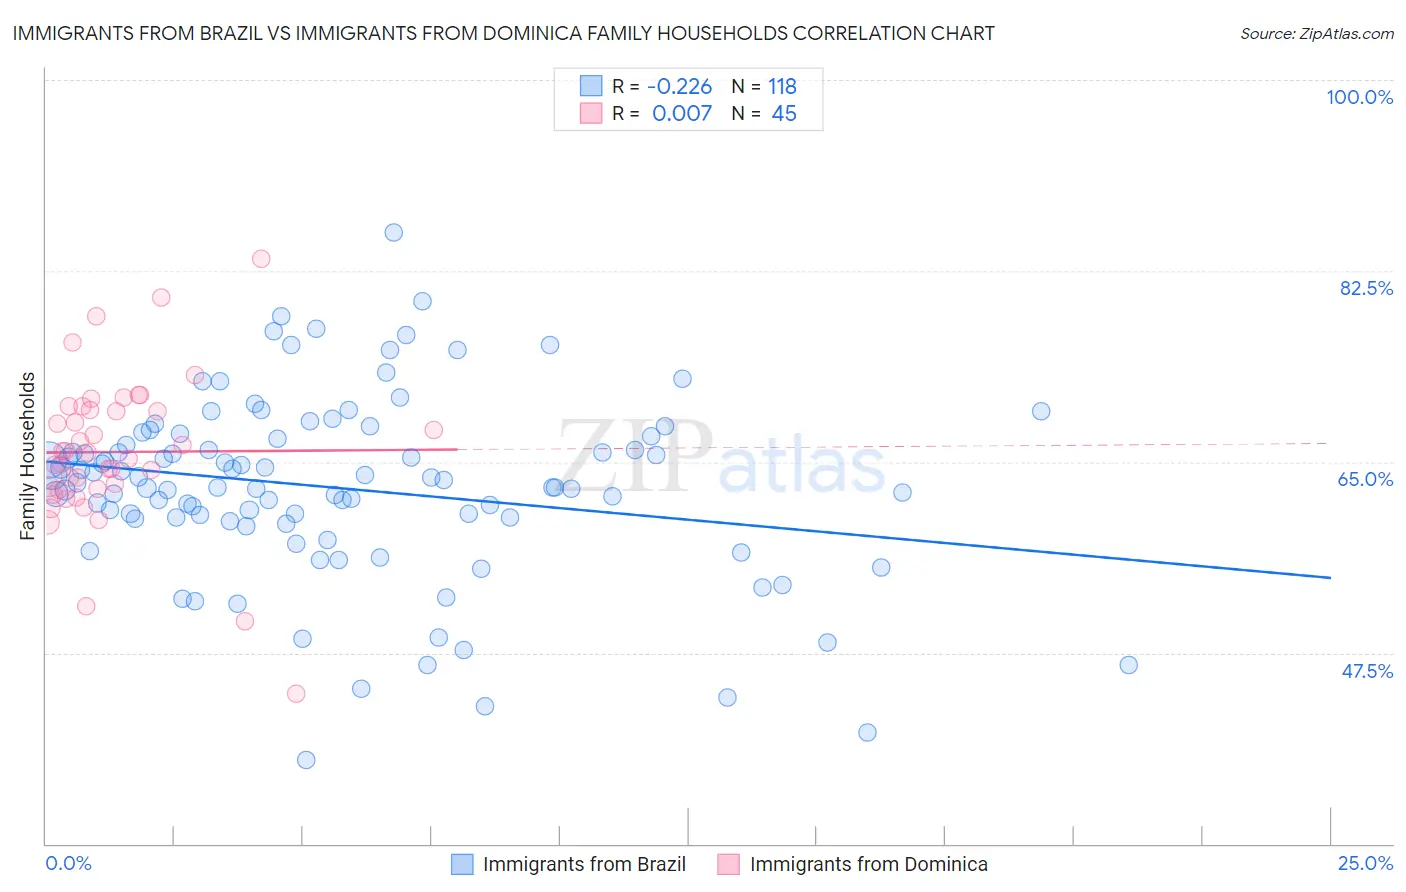 Immigrants from Brazil vs Immigrants from Dominica Family Households